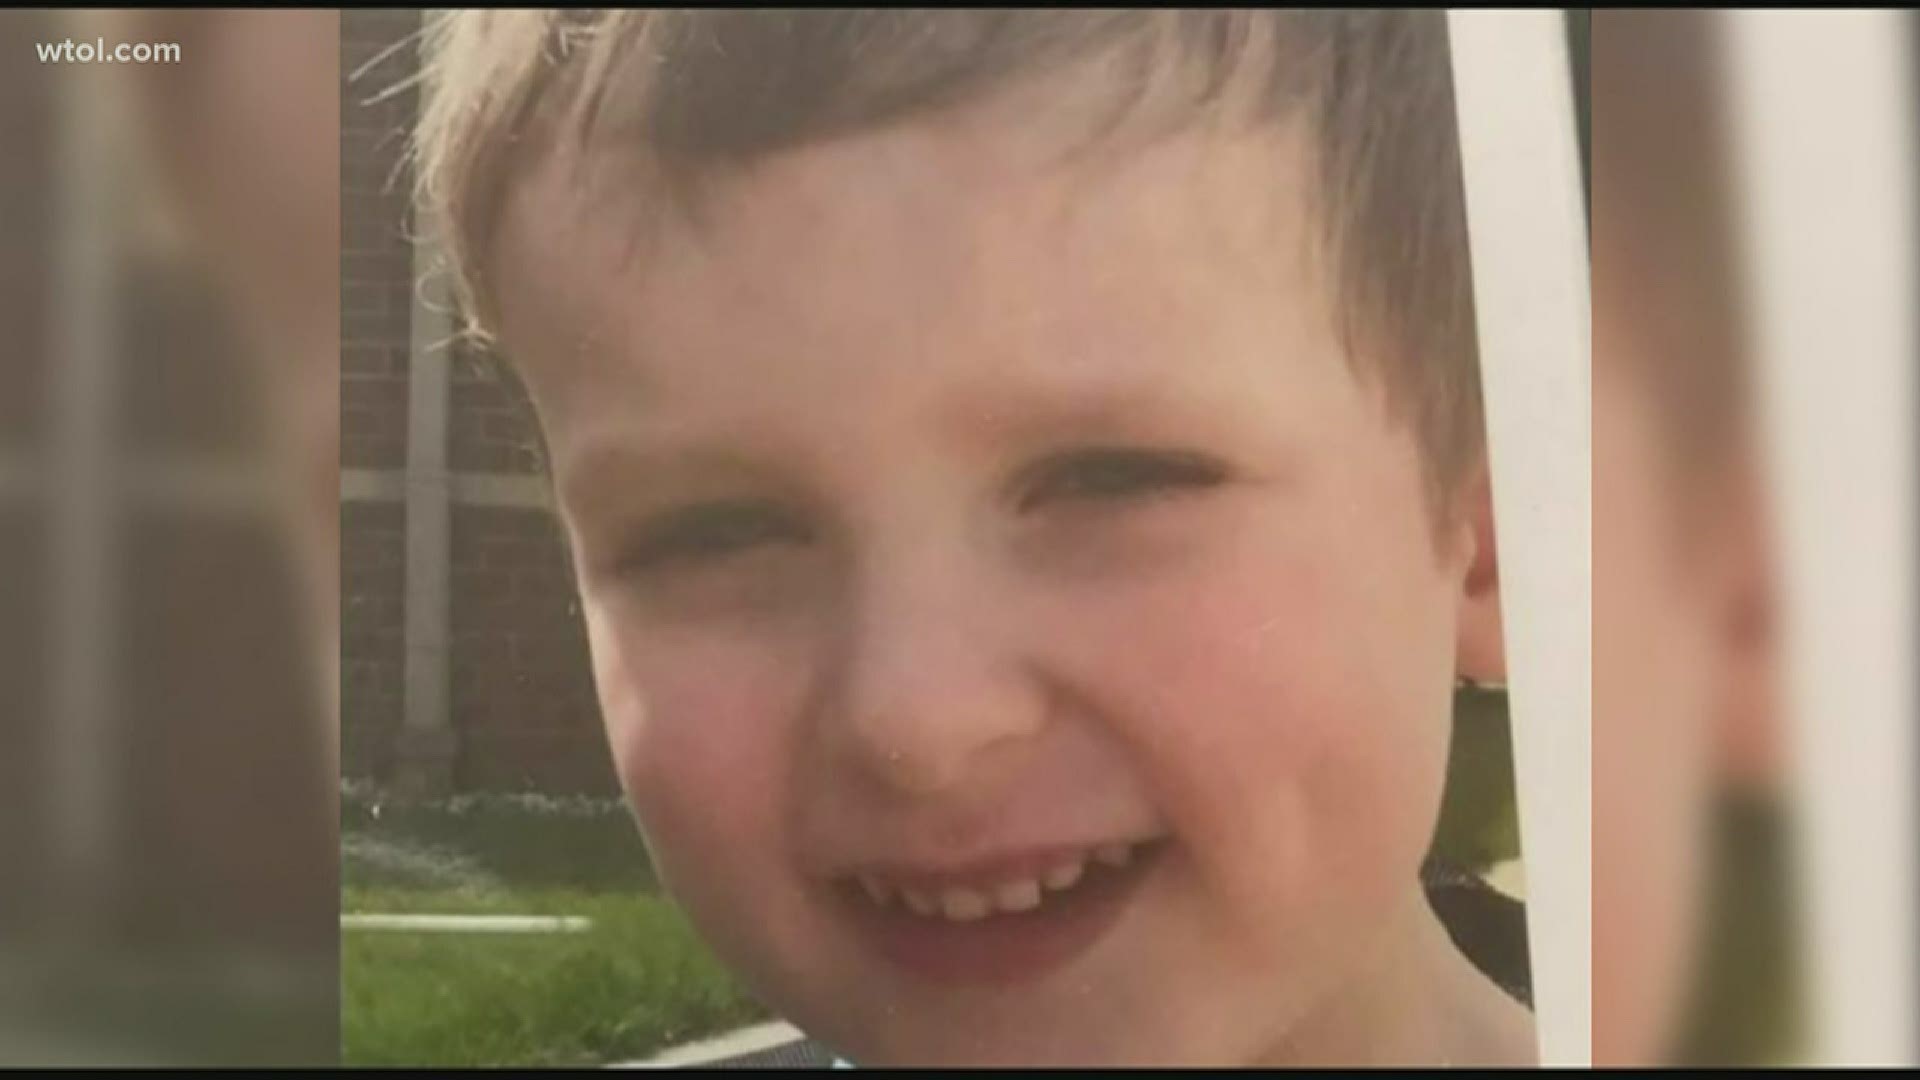 Isaac Schroeder's body was located by a volunteer searcher in a log jam around 5:07 p.m., 3/4 of a mile downstream from his house near the Auglaize River.